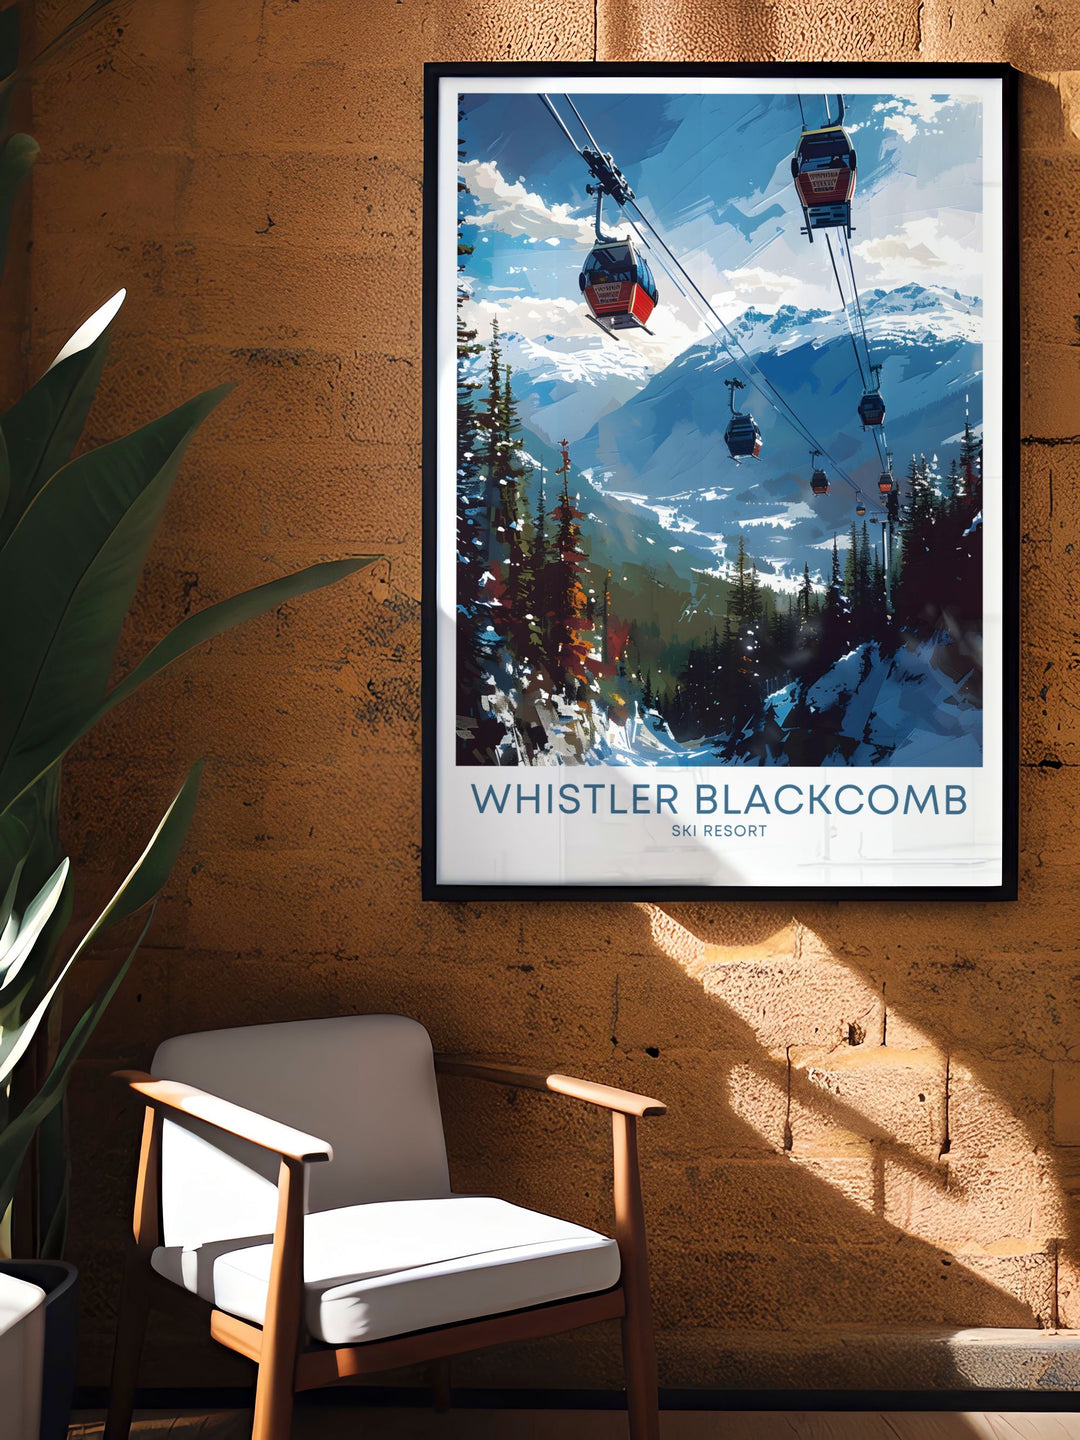 Detailed Peak 2 Peak Gondola prints showcasing Whistler Blackcomb ski resort, ideal for home decor and gifts, capturing the magic of skiing and snowboarding in Whistler Canada with vibrant and detailed artwork.